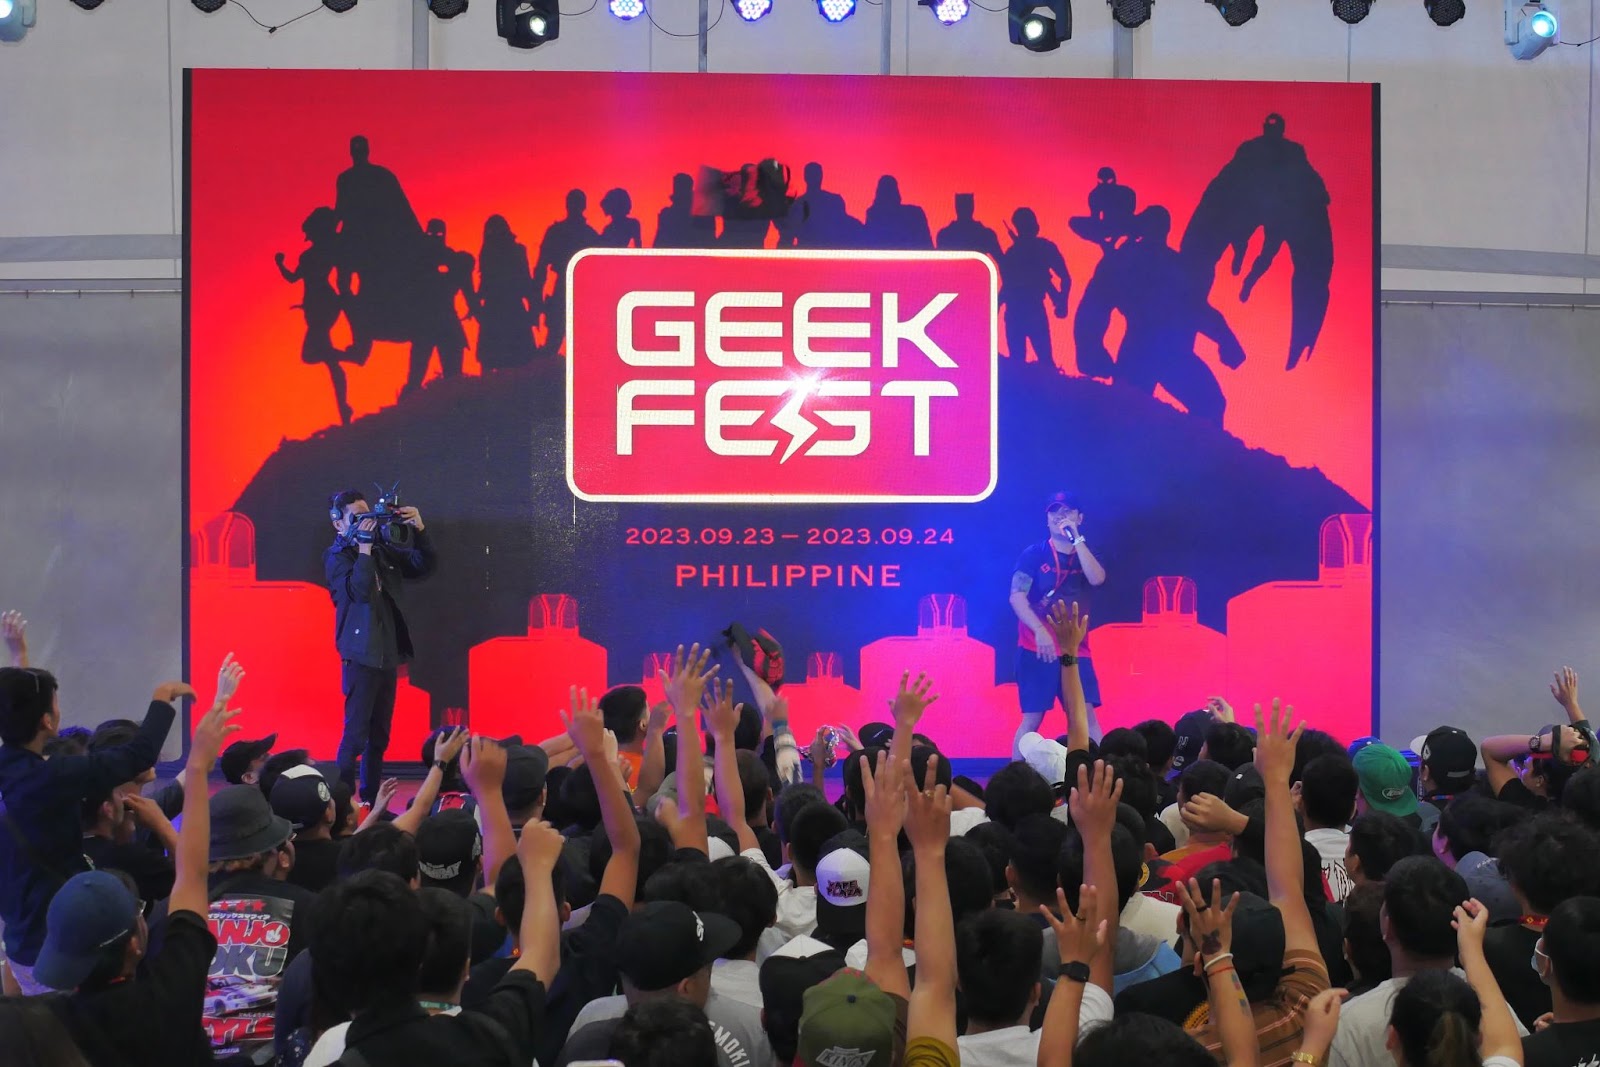 Geekvape has announced the inauguration of the world’s first e-cigarette industry “Geek Fest” fan festival in the Philippines.